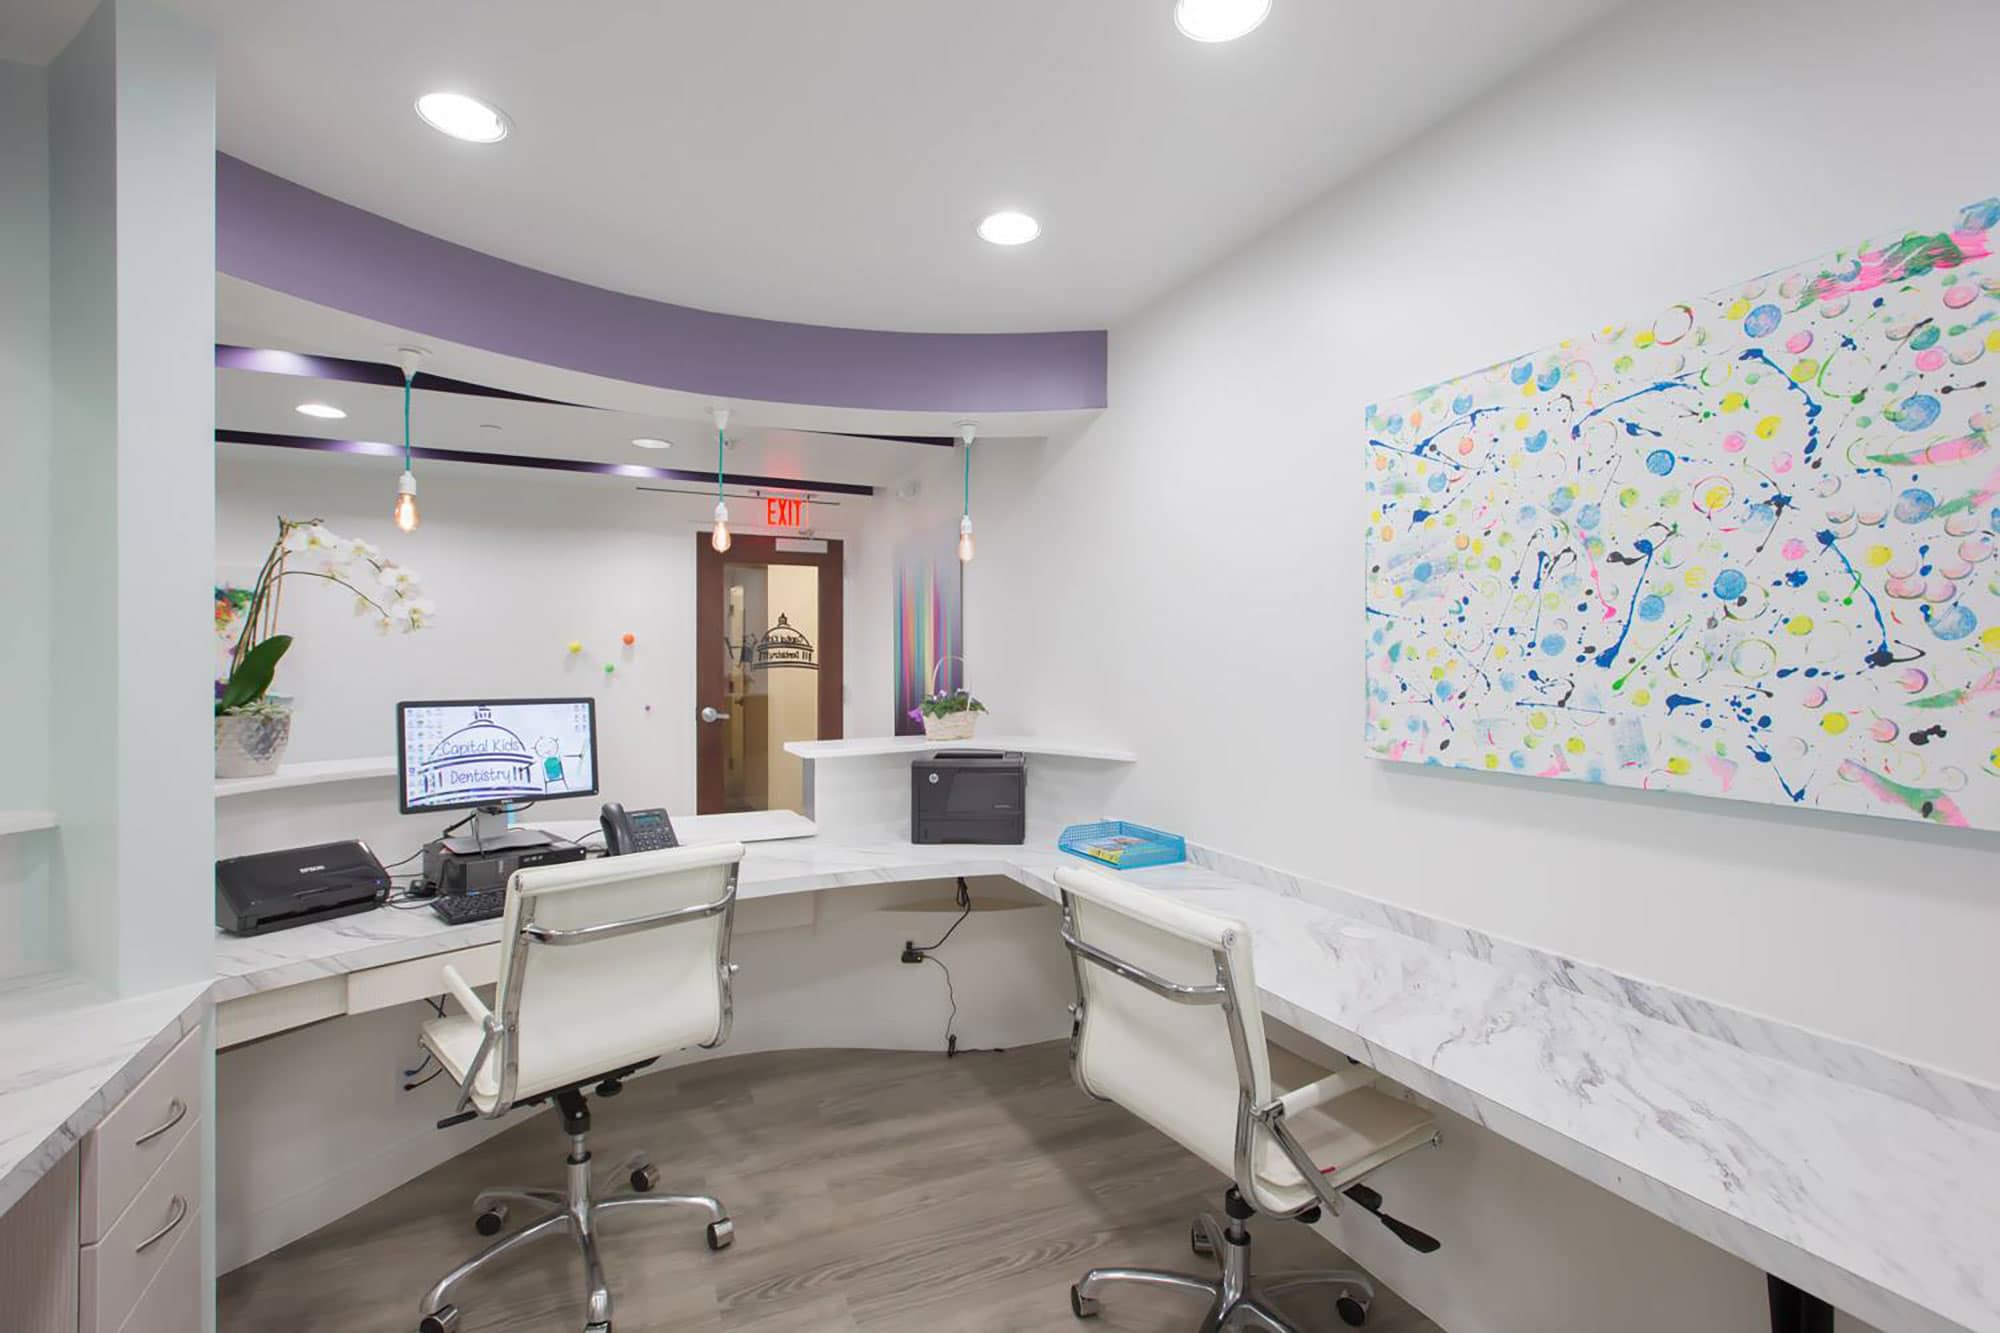 office space for receptionists at dental office with white chairs and counters